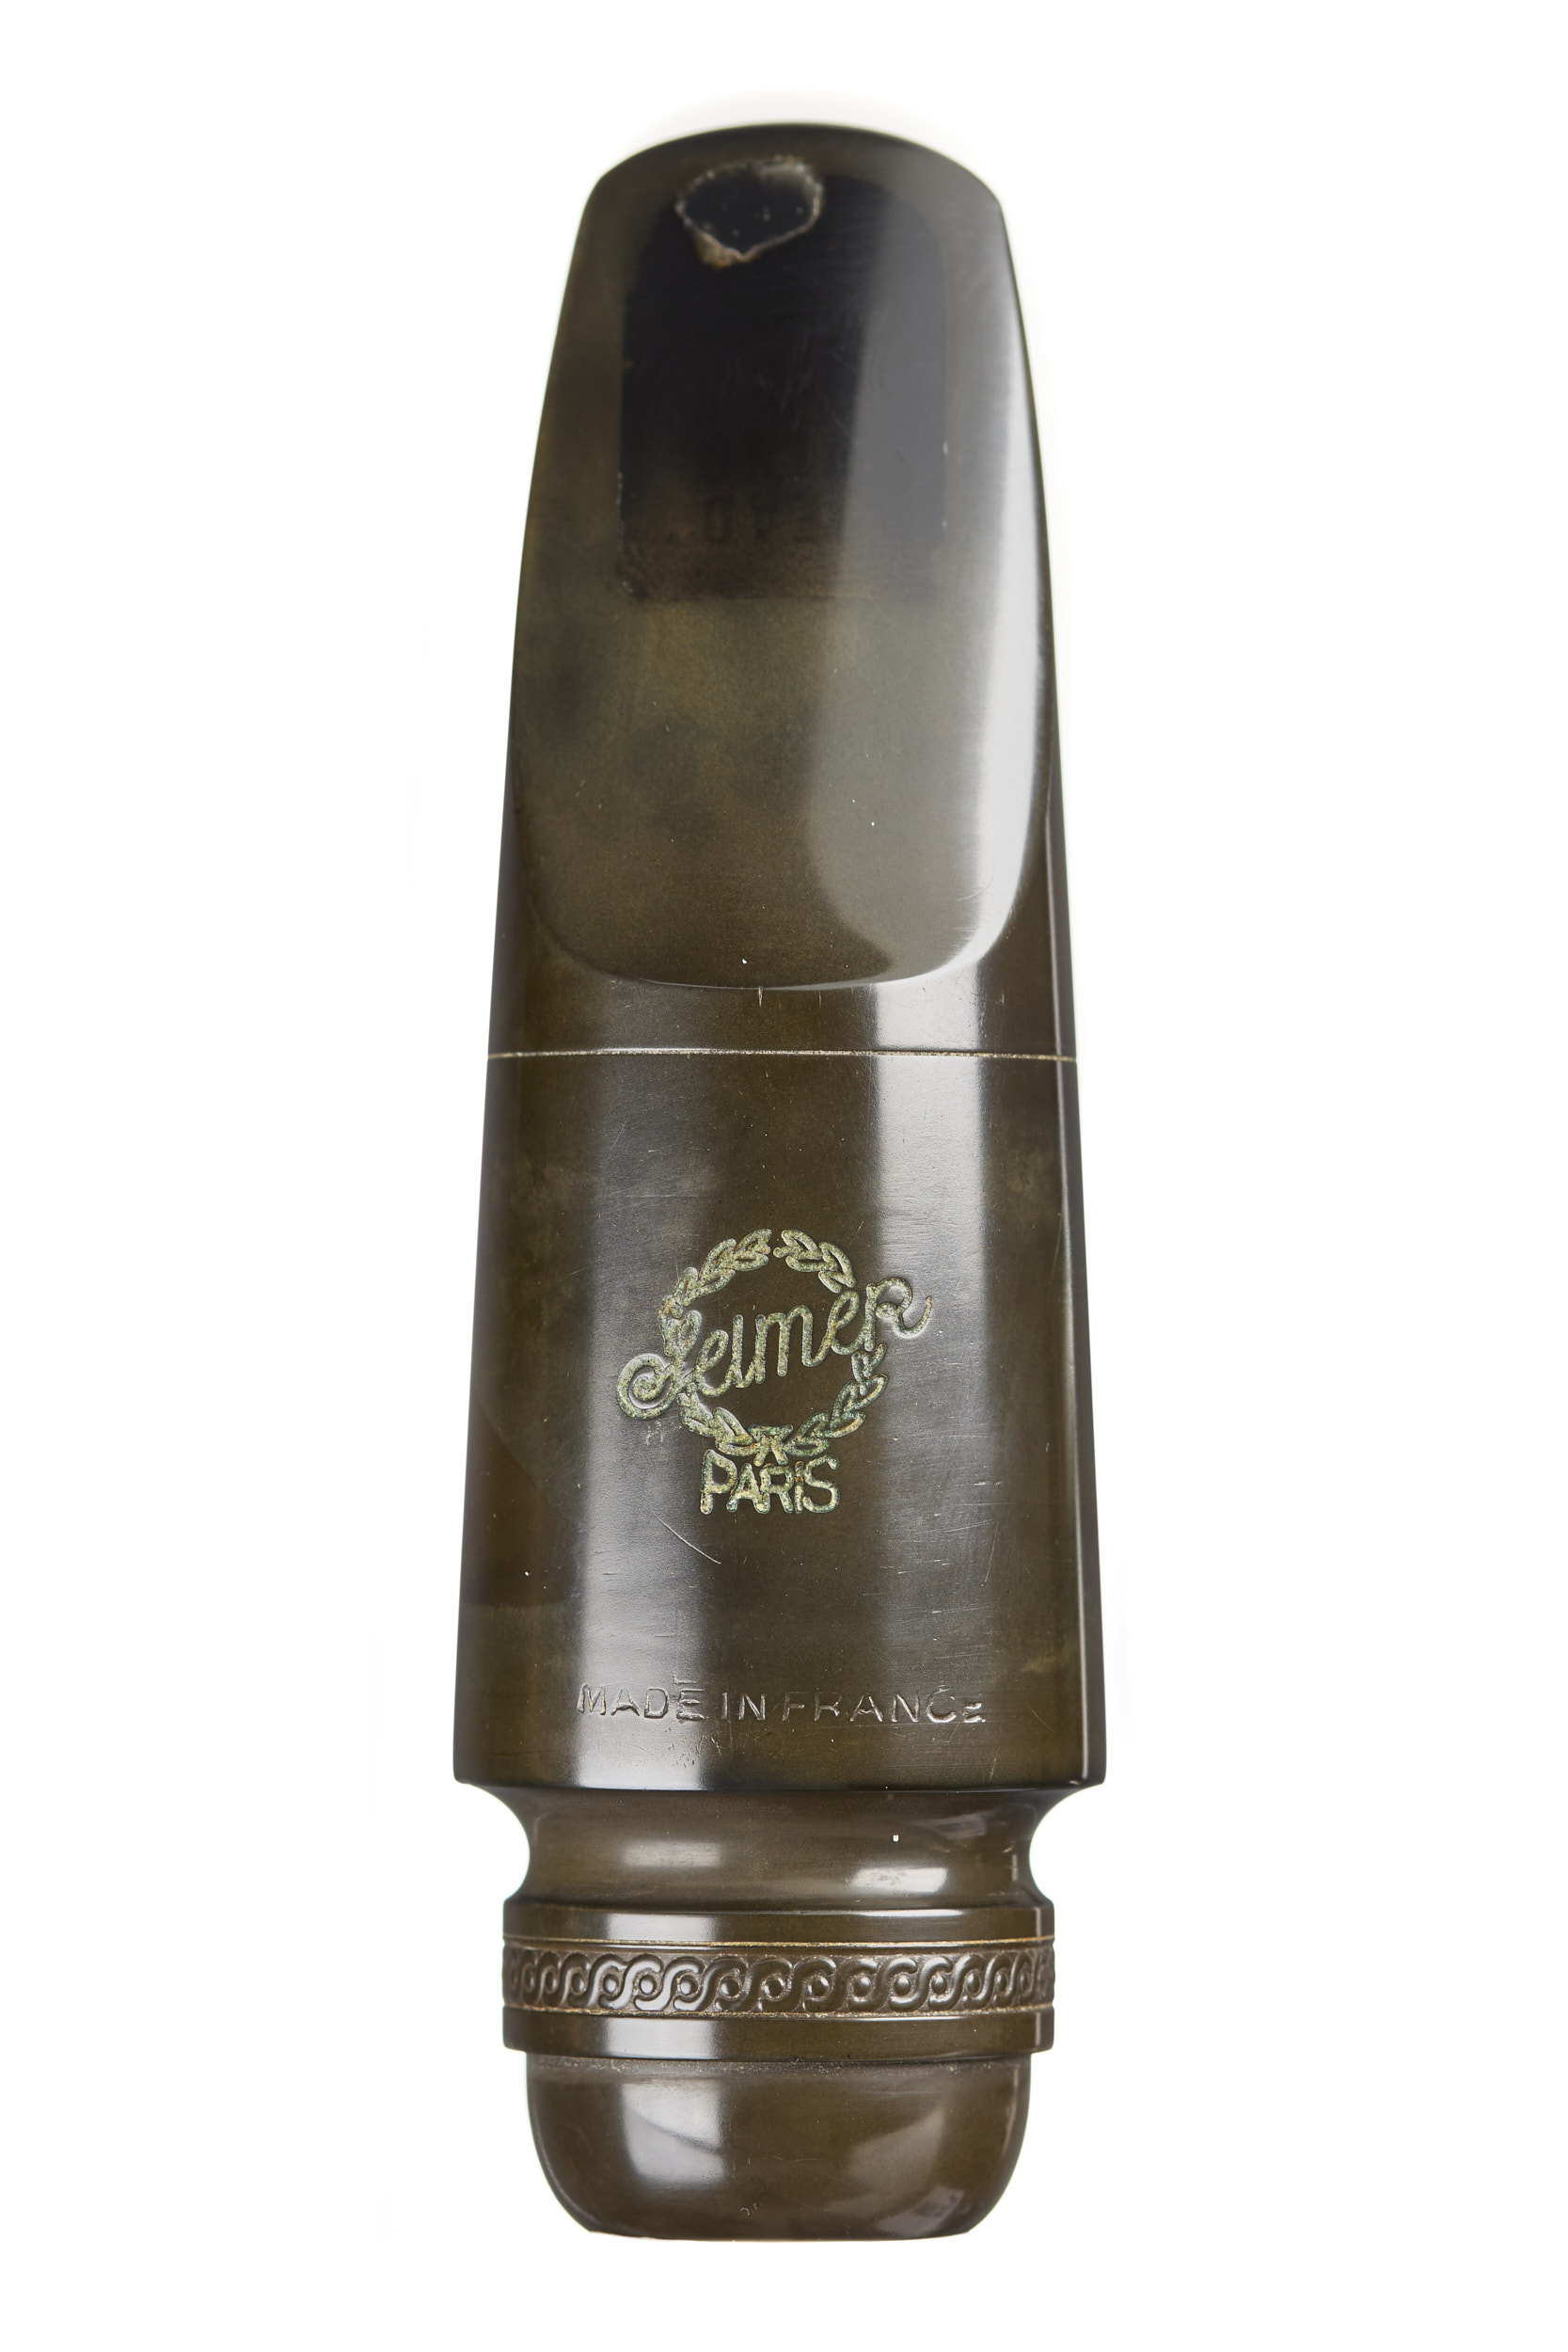 (Used) Selmer Short Shank Soloist C Tenor Sax Mouthpiece refaced to 7* by Ed Pillinger